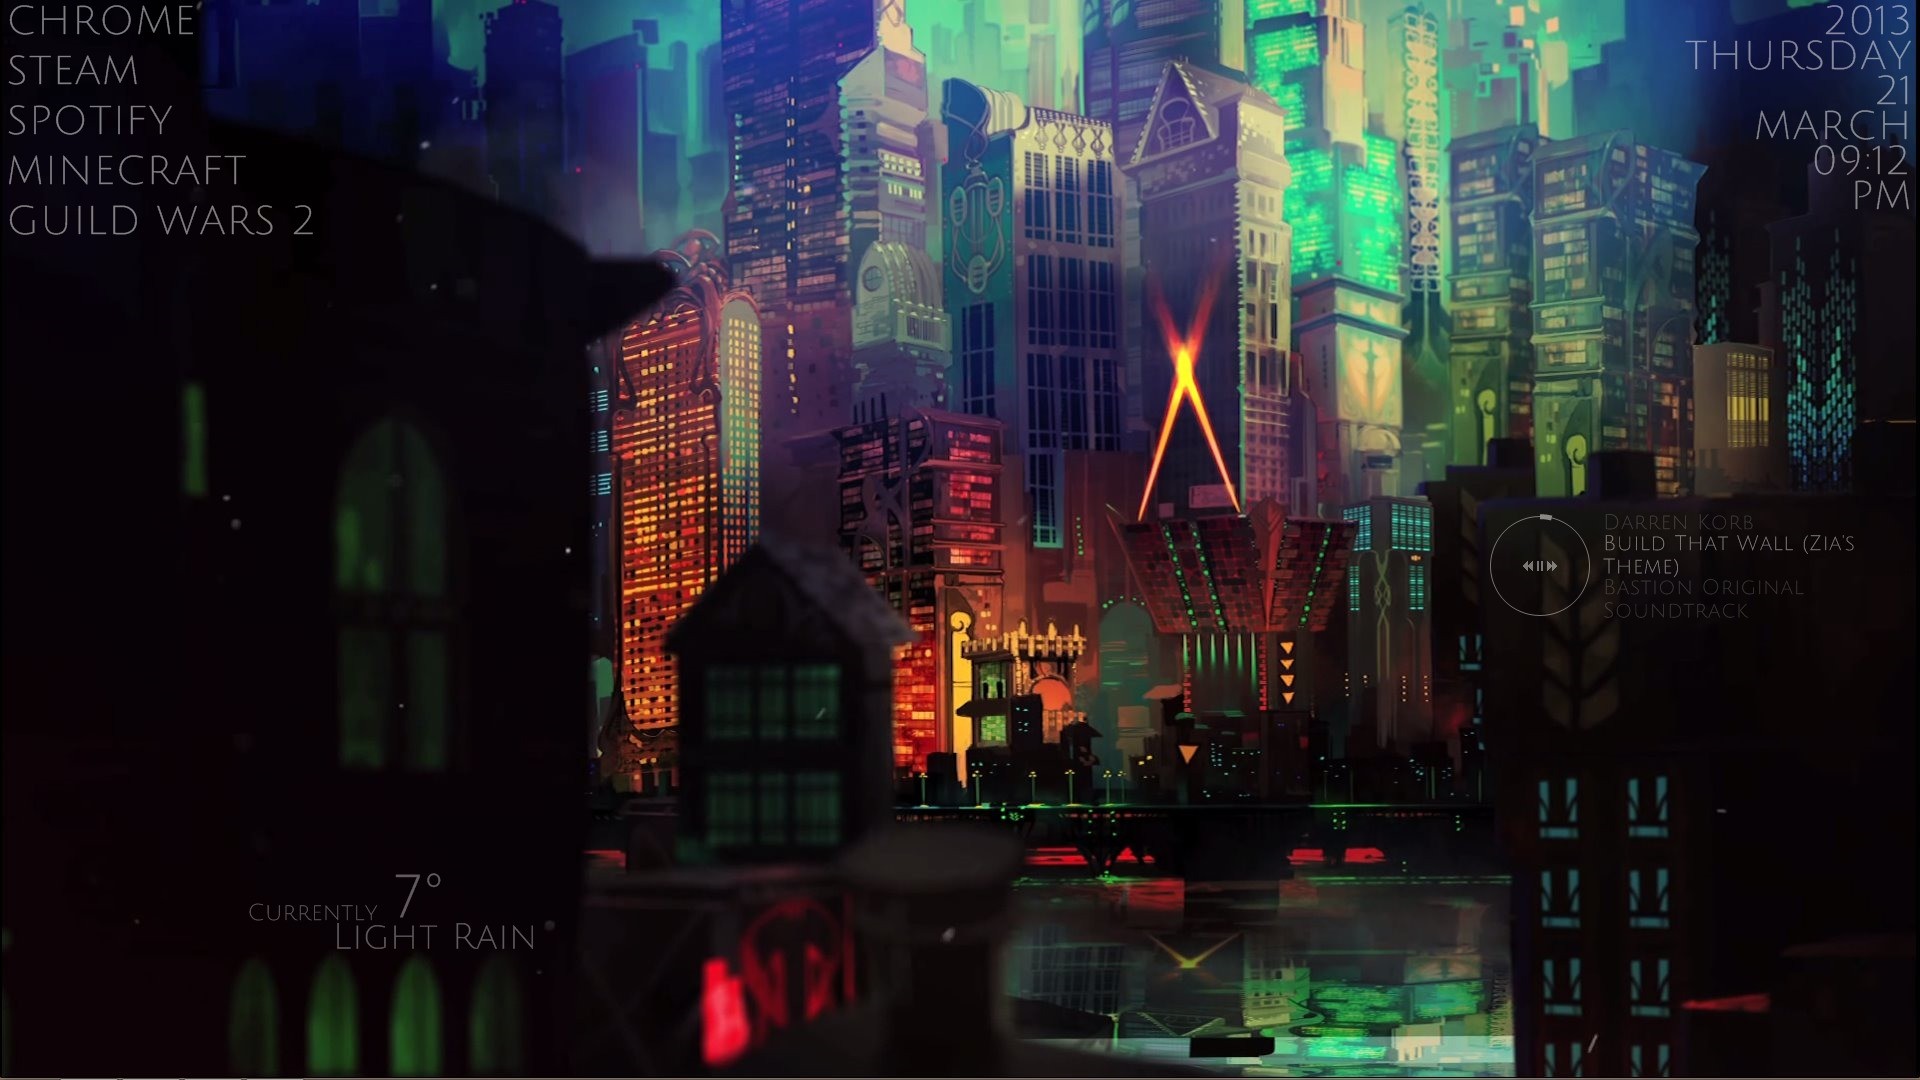 HD desktop wallpaper featuring a stylized cityscape from the game Transistor with vibrant colors and neon lights.